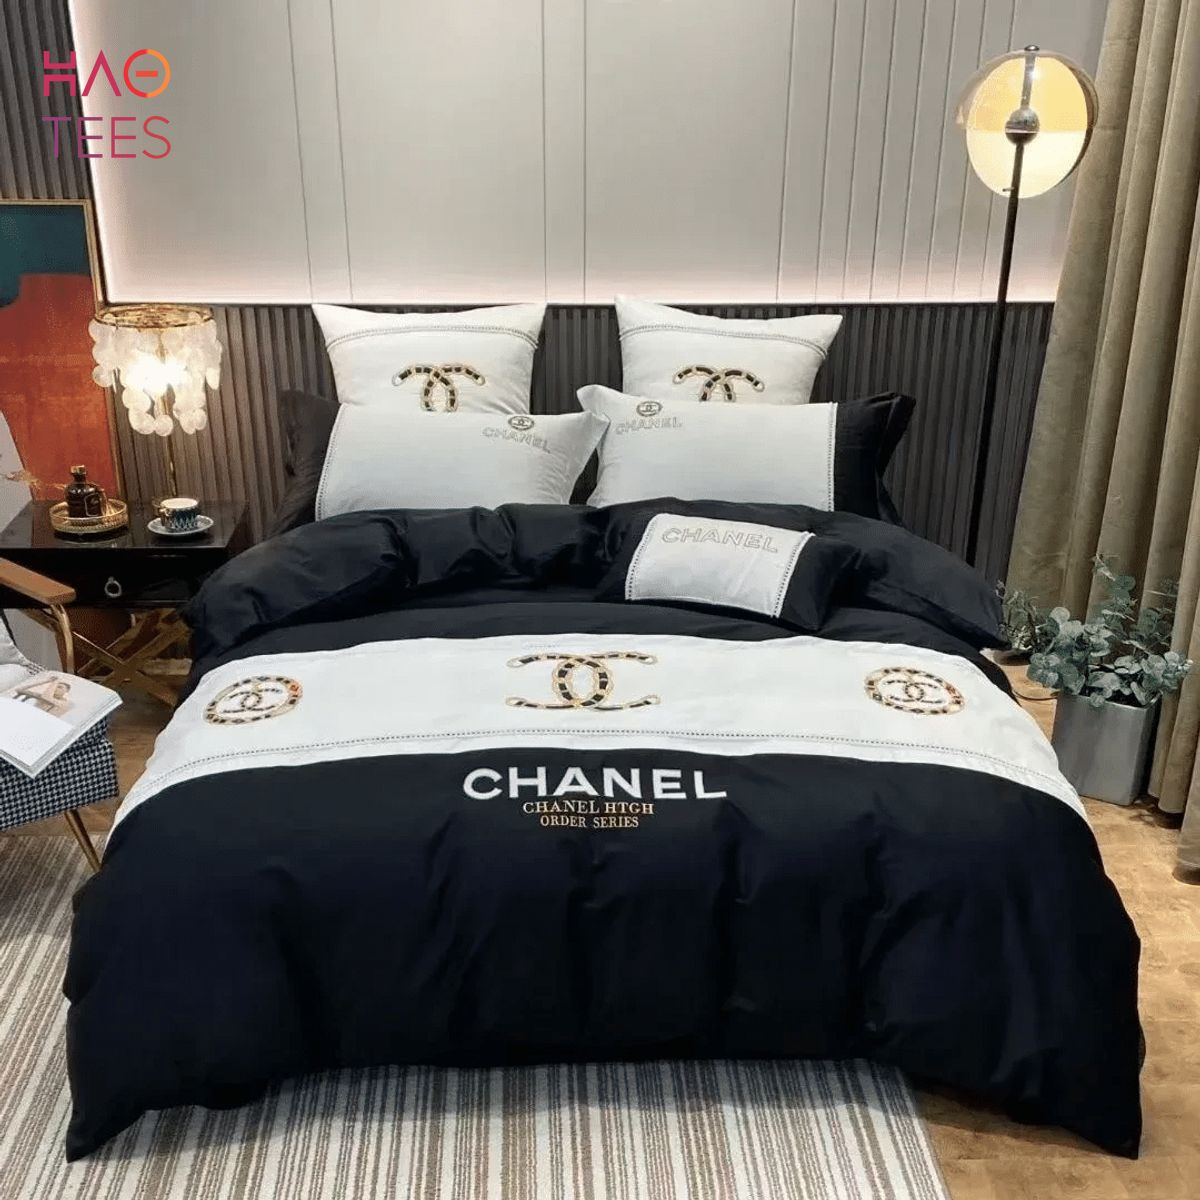 [THE BEST] Chanel Mix White Luxury Color Bedding Sets All Over Printed